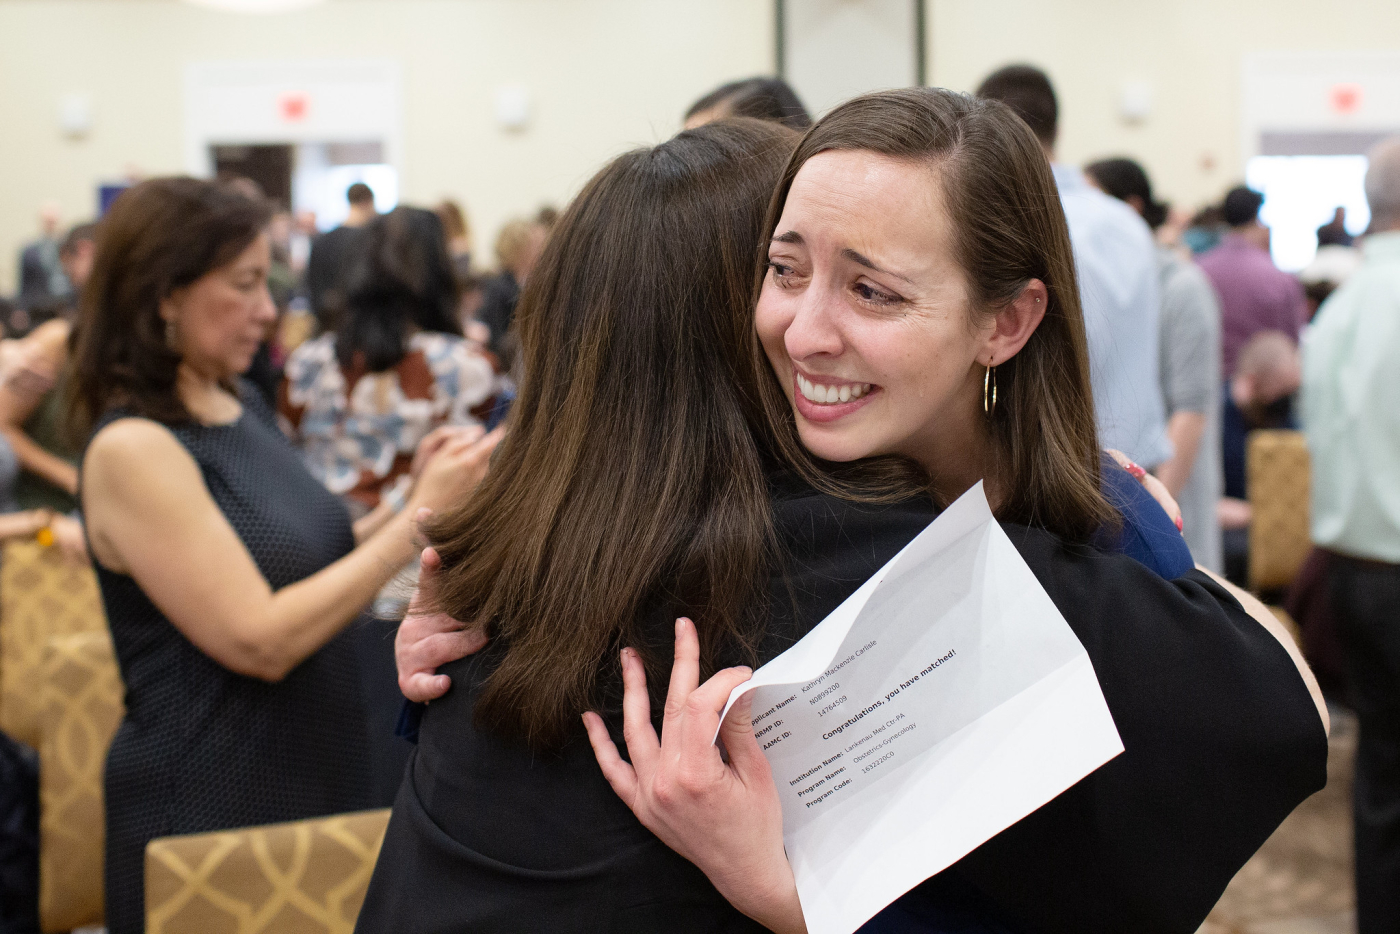 Kathryn Carlisle, facing, gets a hug from her mother, Mary Ann Carlisle, after her daughter matched with Lankenau Medical Center in Wynnewood, Pa., during Match Day at the Sheraton Harrisburg Hershey Hotel on Friday, March 17, 2023.